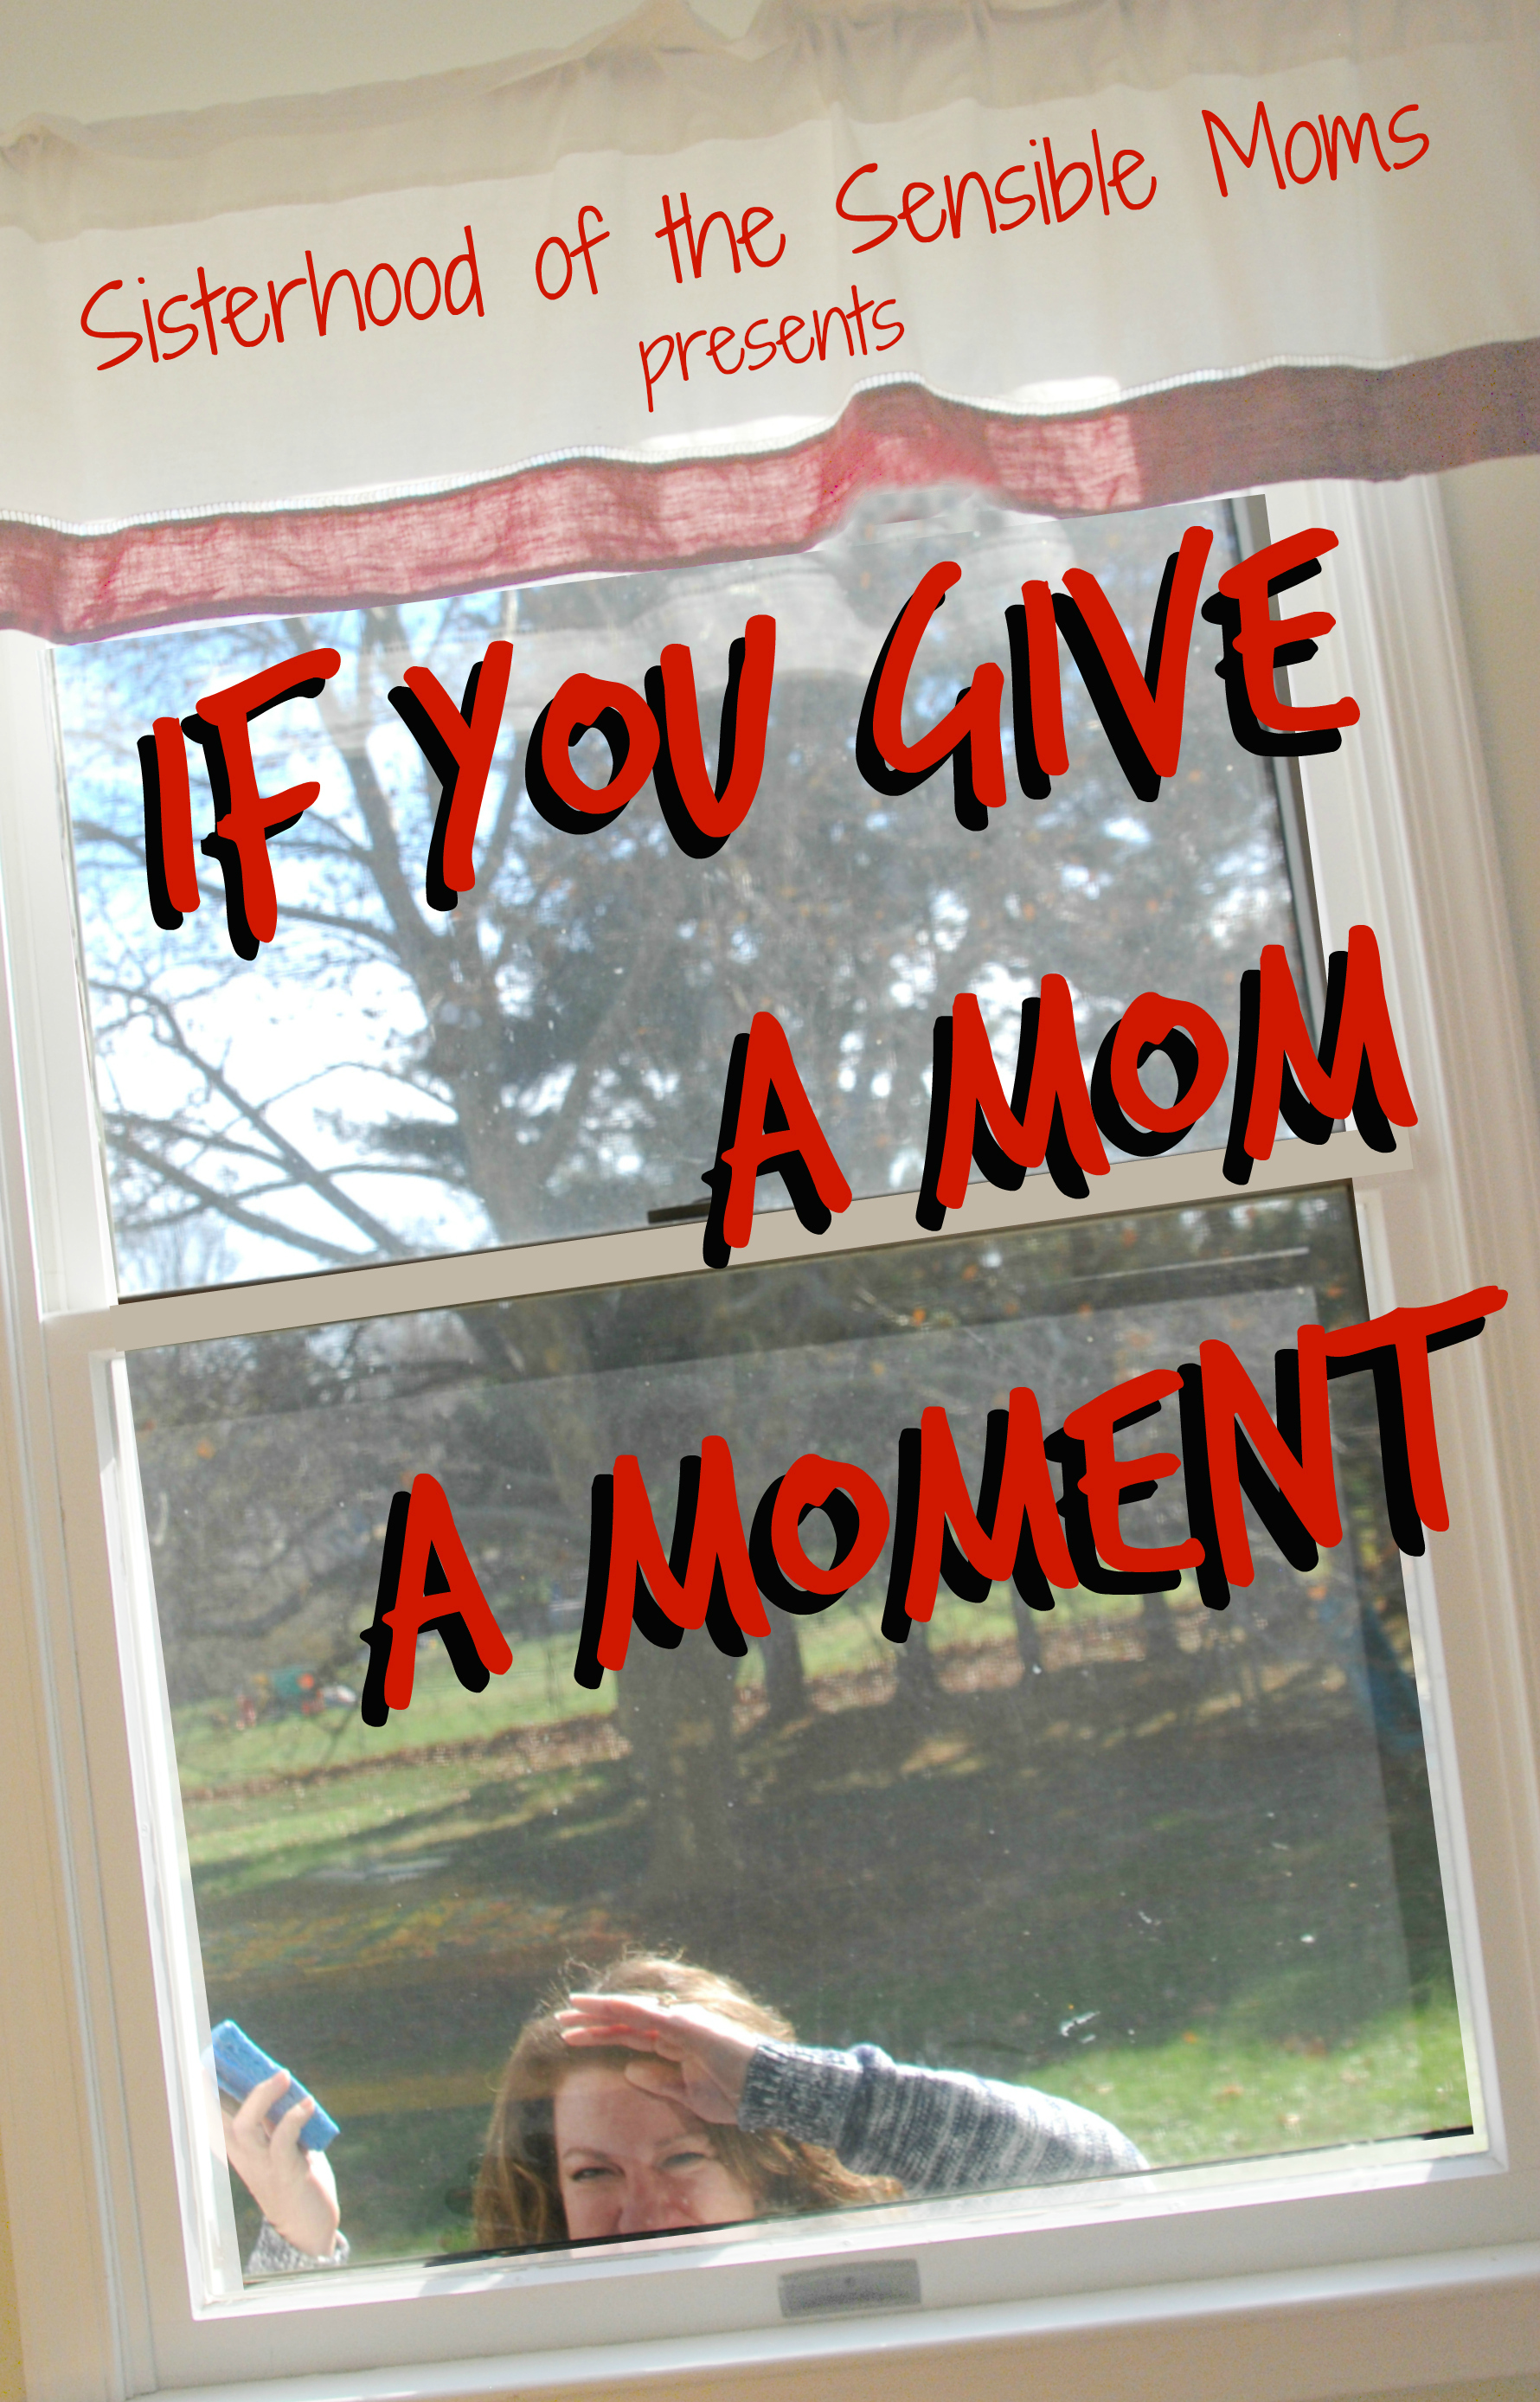 If You Give a Mom a Moment - The humorous bedtime story for moms who do it all. Sisterhood of the Sensible Moms